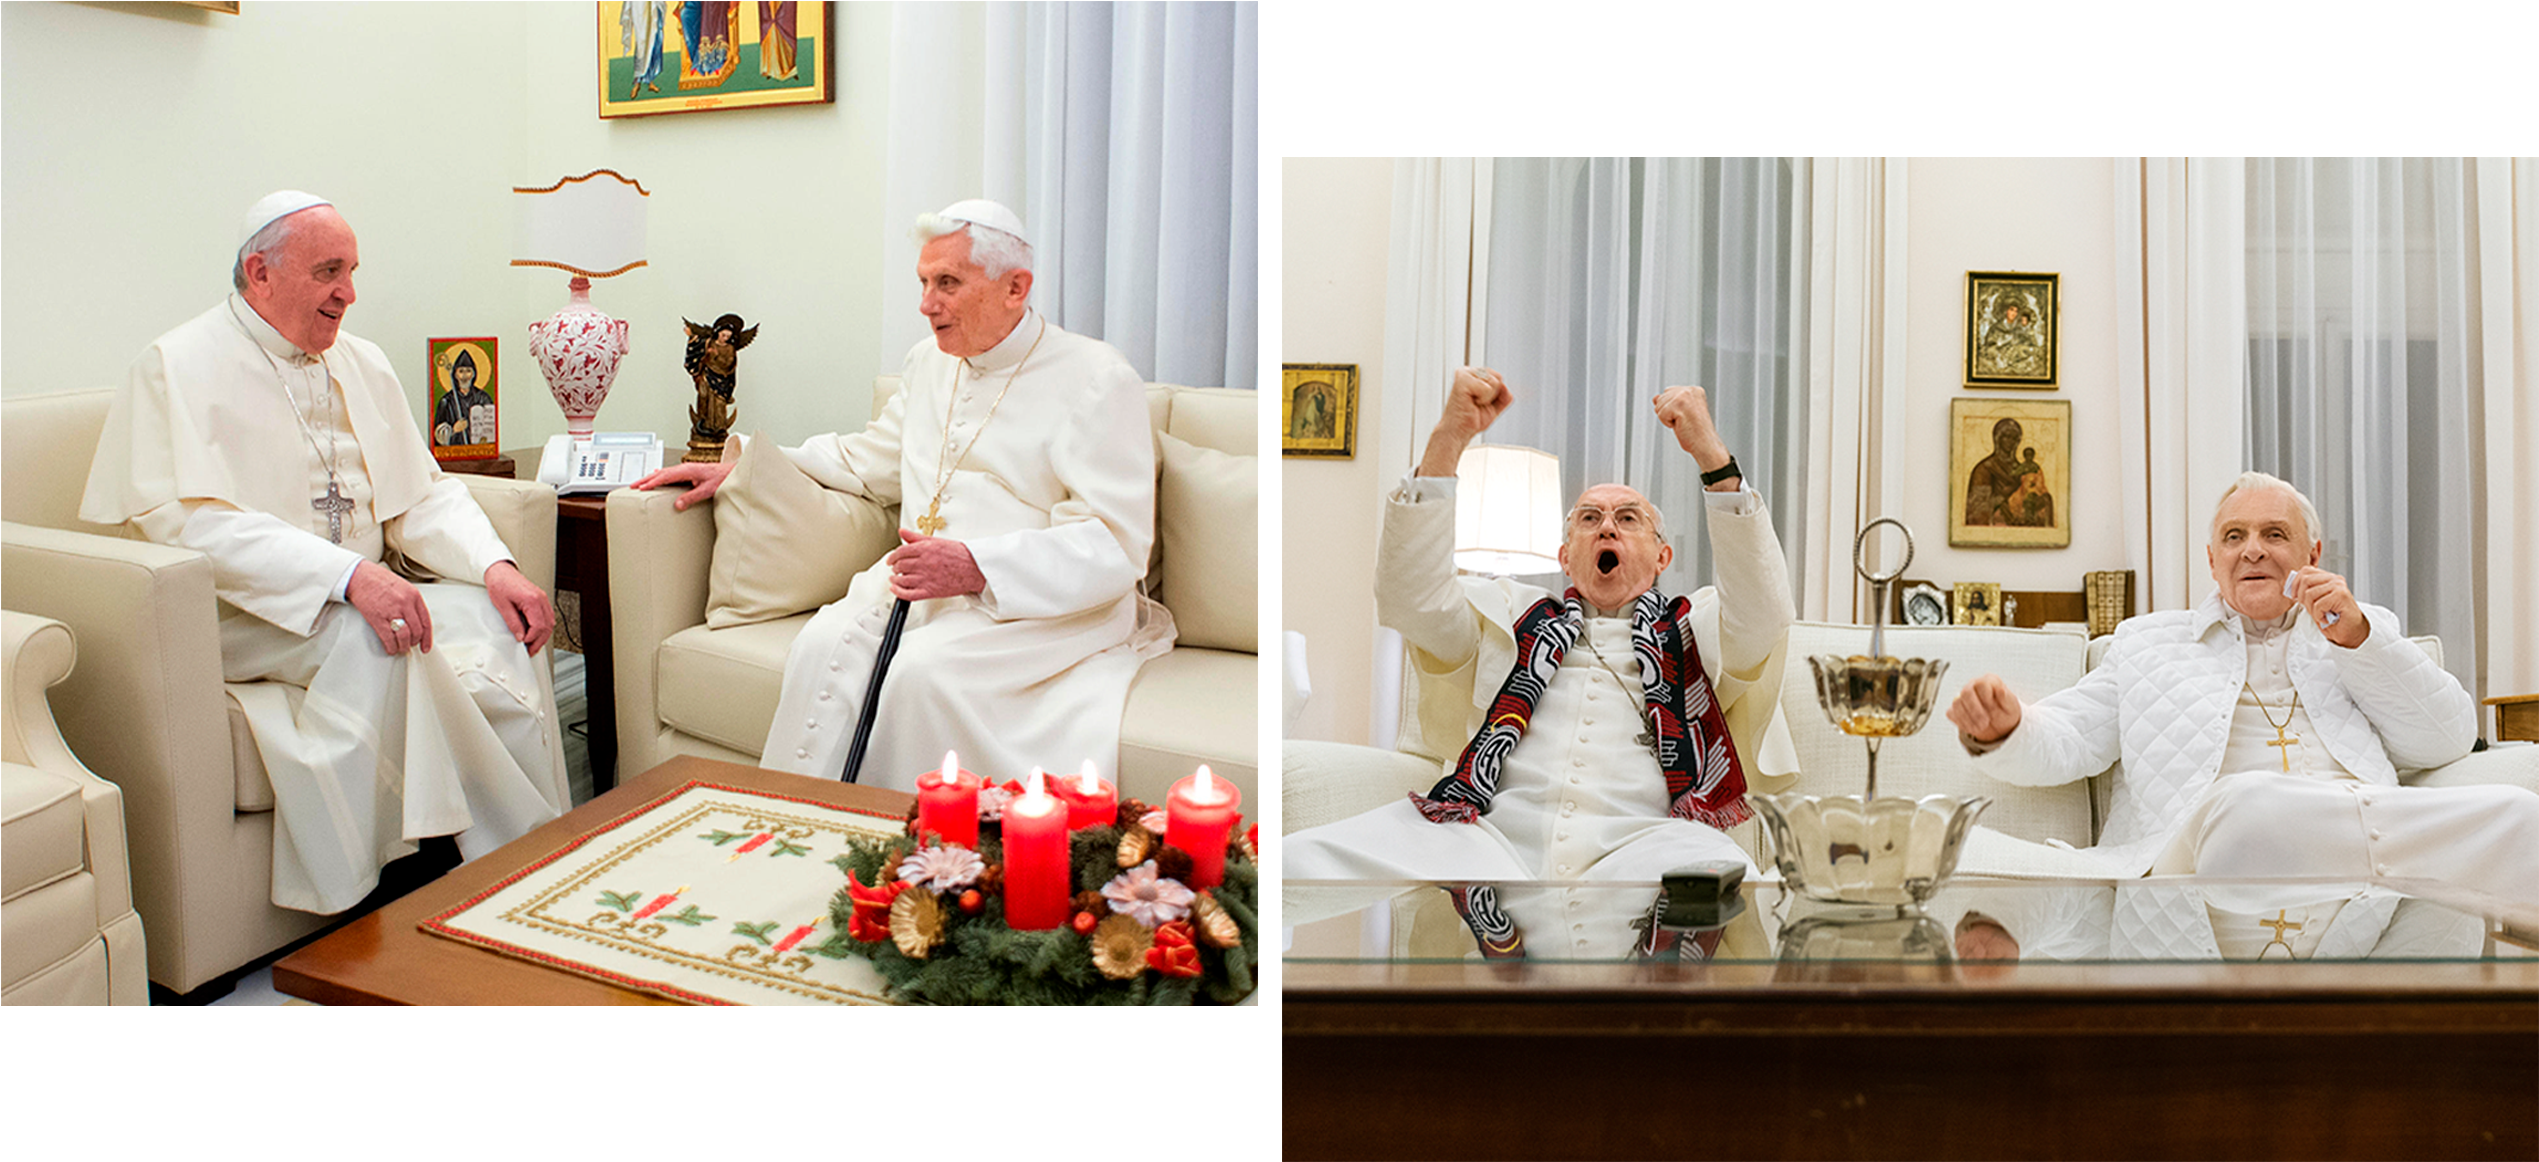 Two Popes Meetingand Watching Football